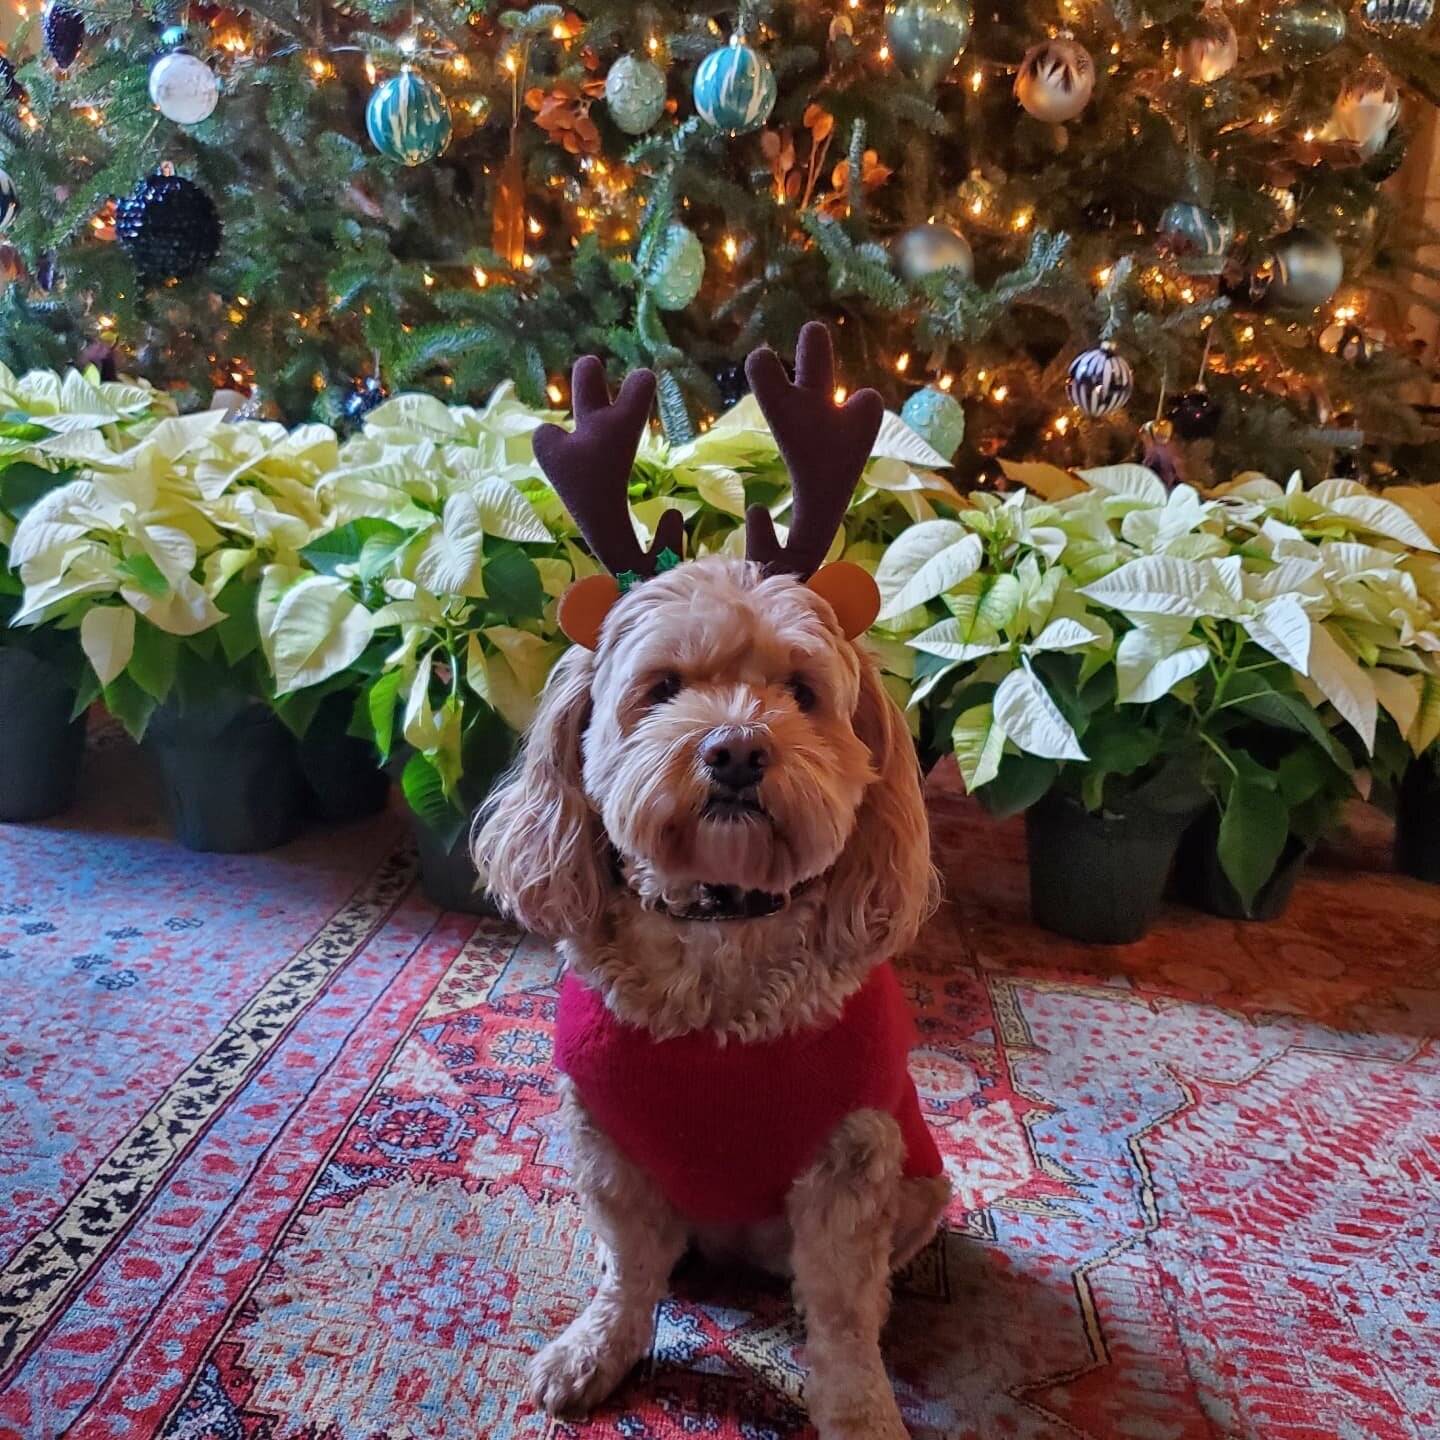 Merry Christmas season from our mascot, Moose!

May it be filled with brightness and cheer!